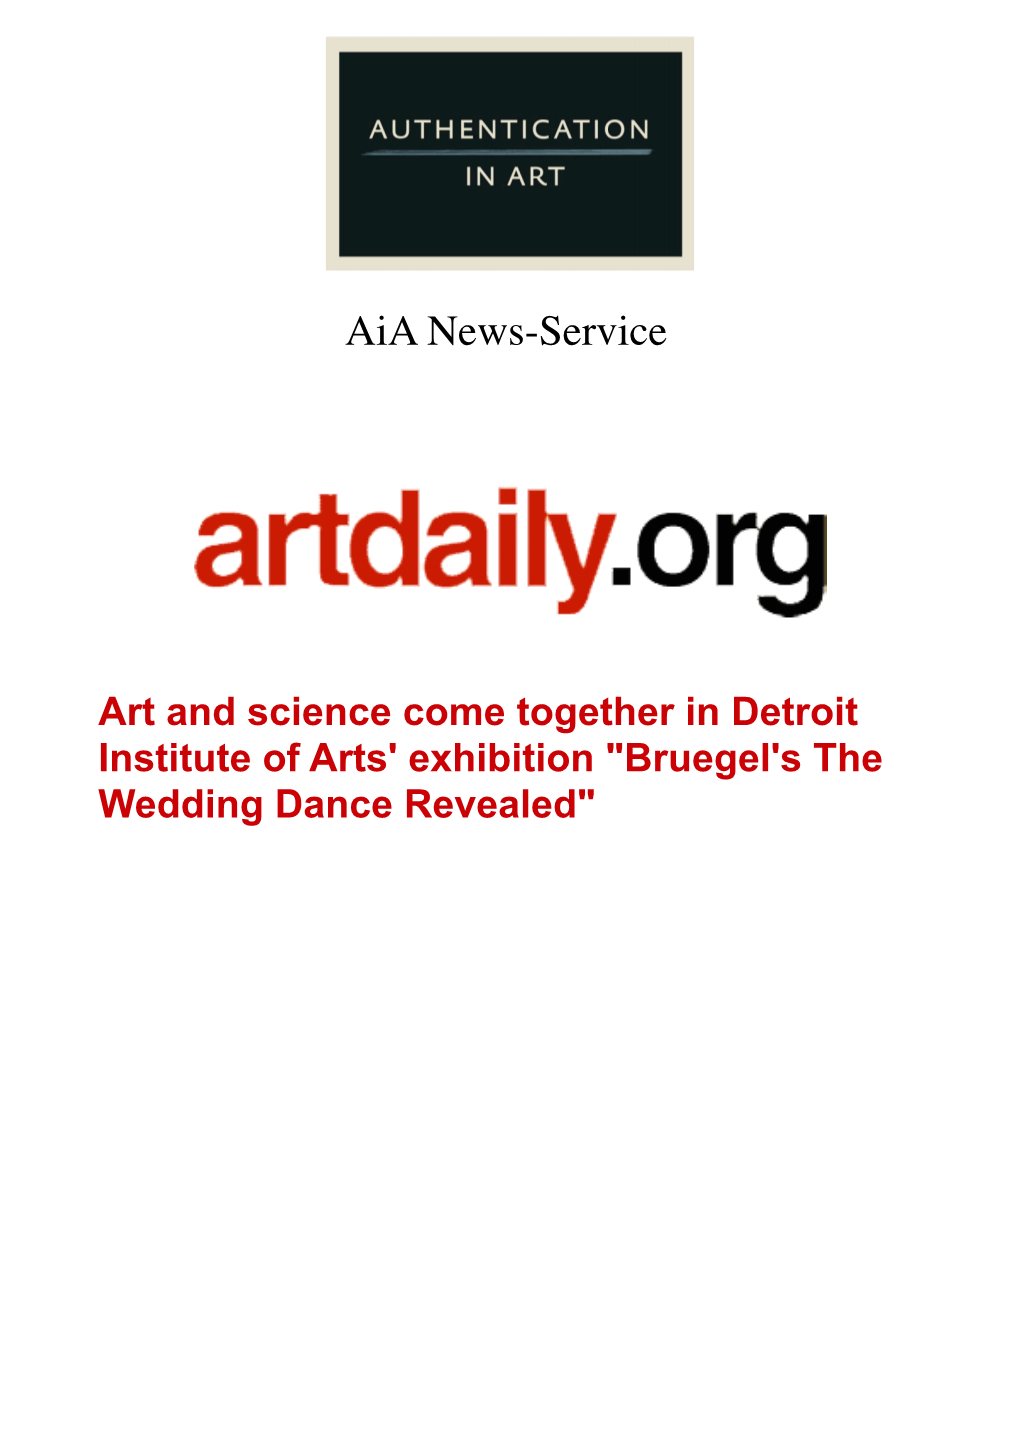 Art and Science Come Together in Detroit Institute of Arts' Exhibition "Bruegel's the Wedding Dance Revealed" !